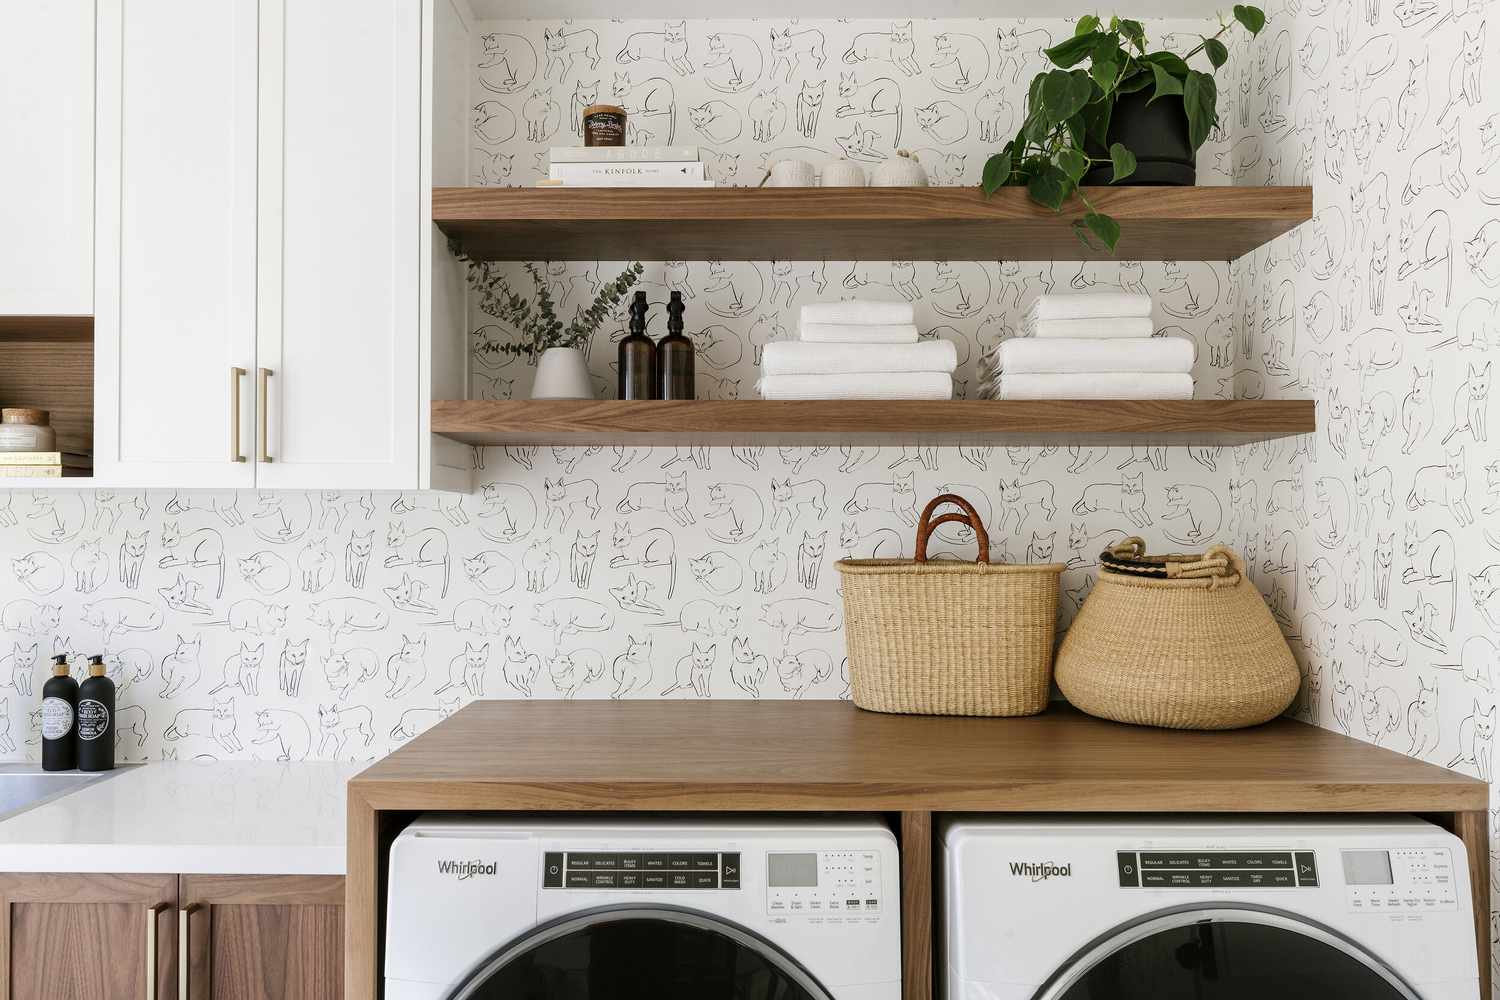 How To Make Laundry Room Shelves | Storables